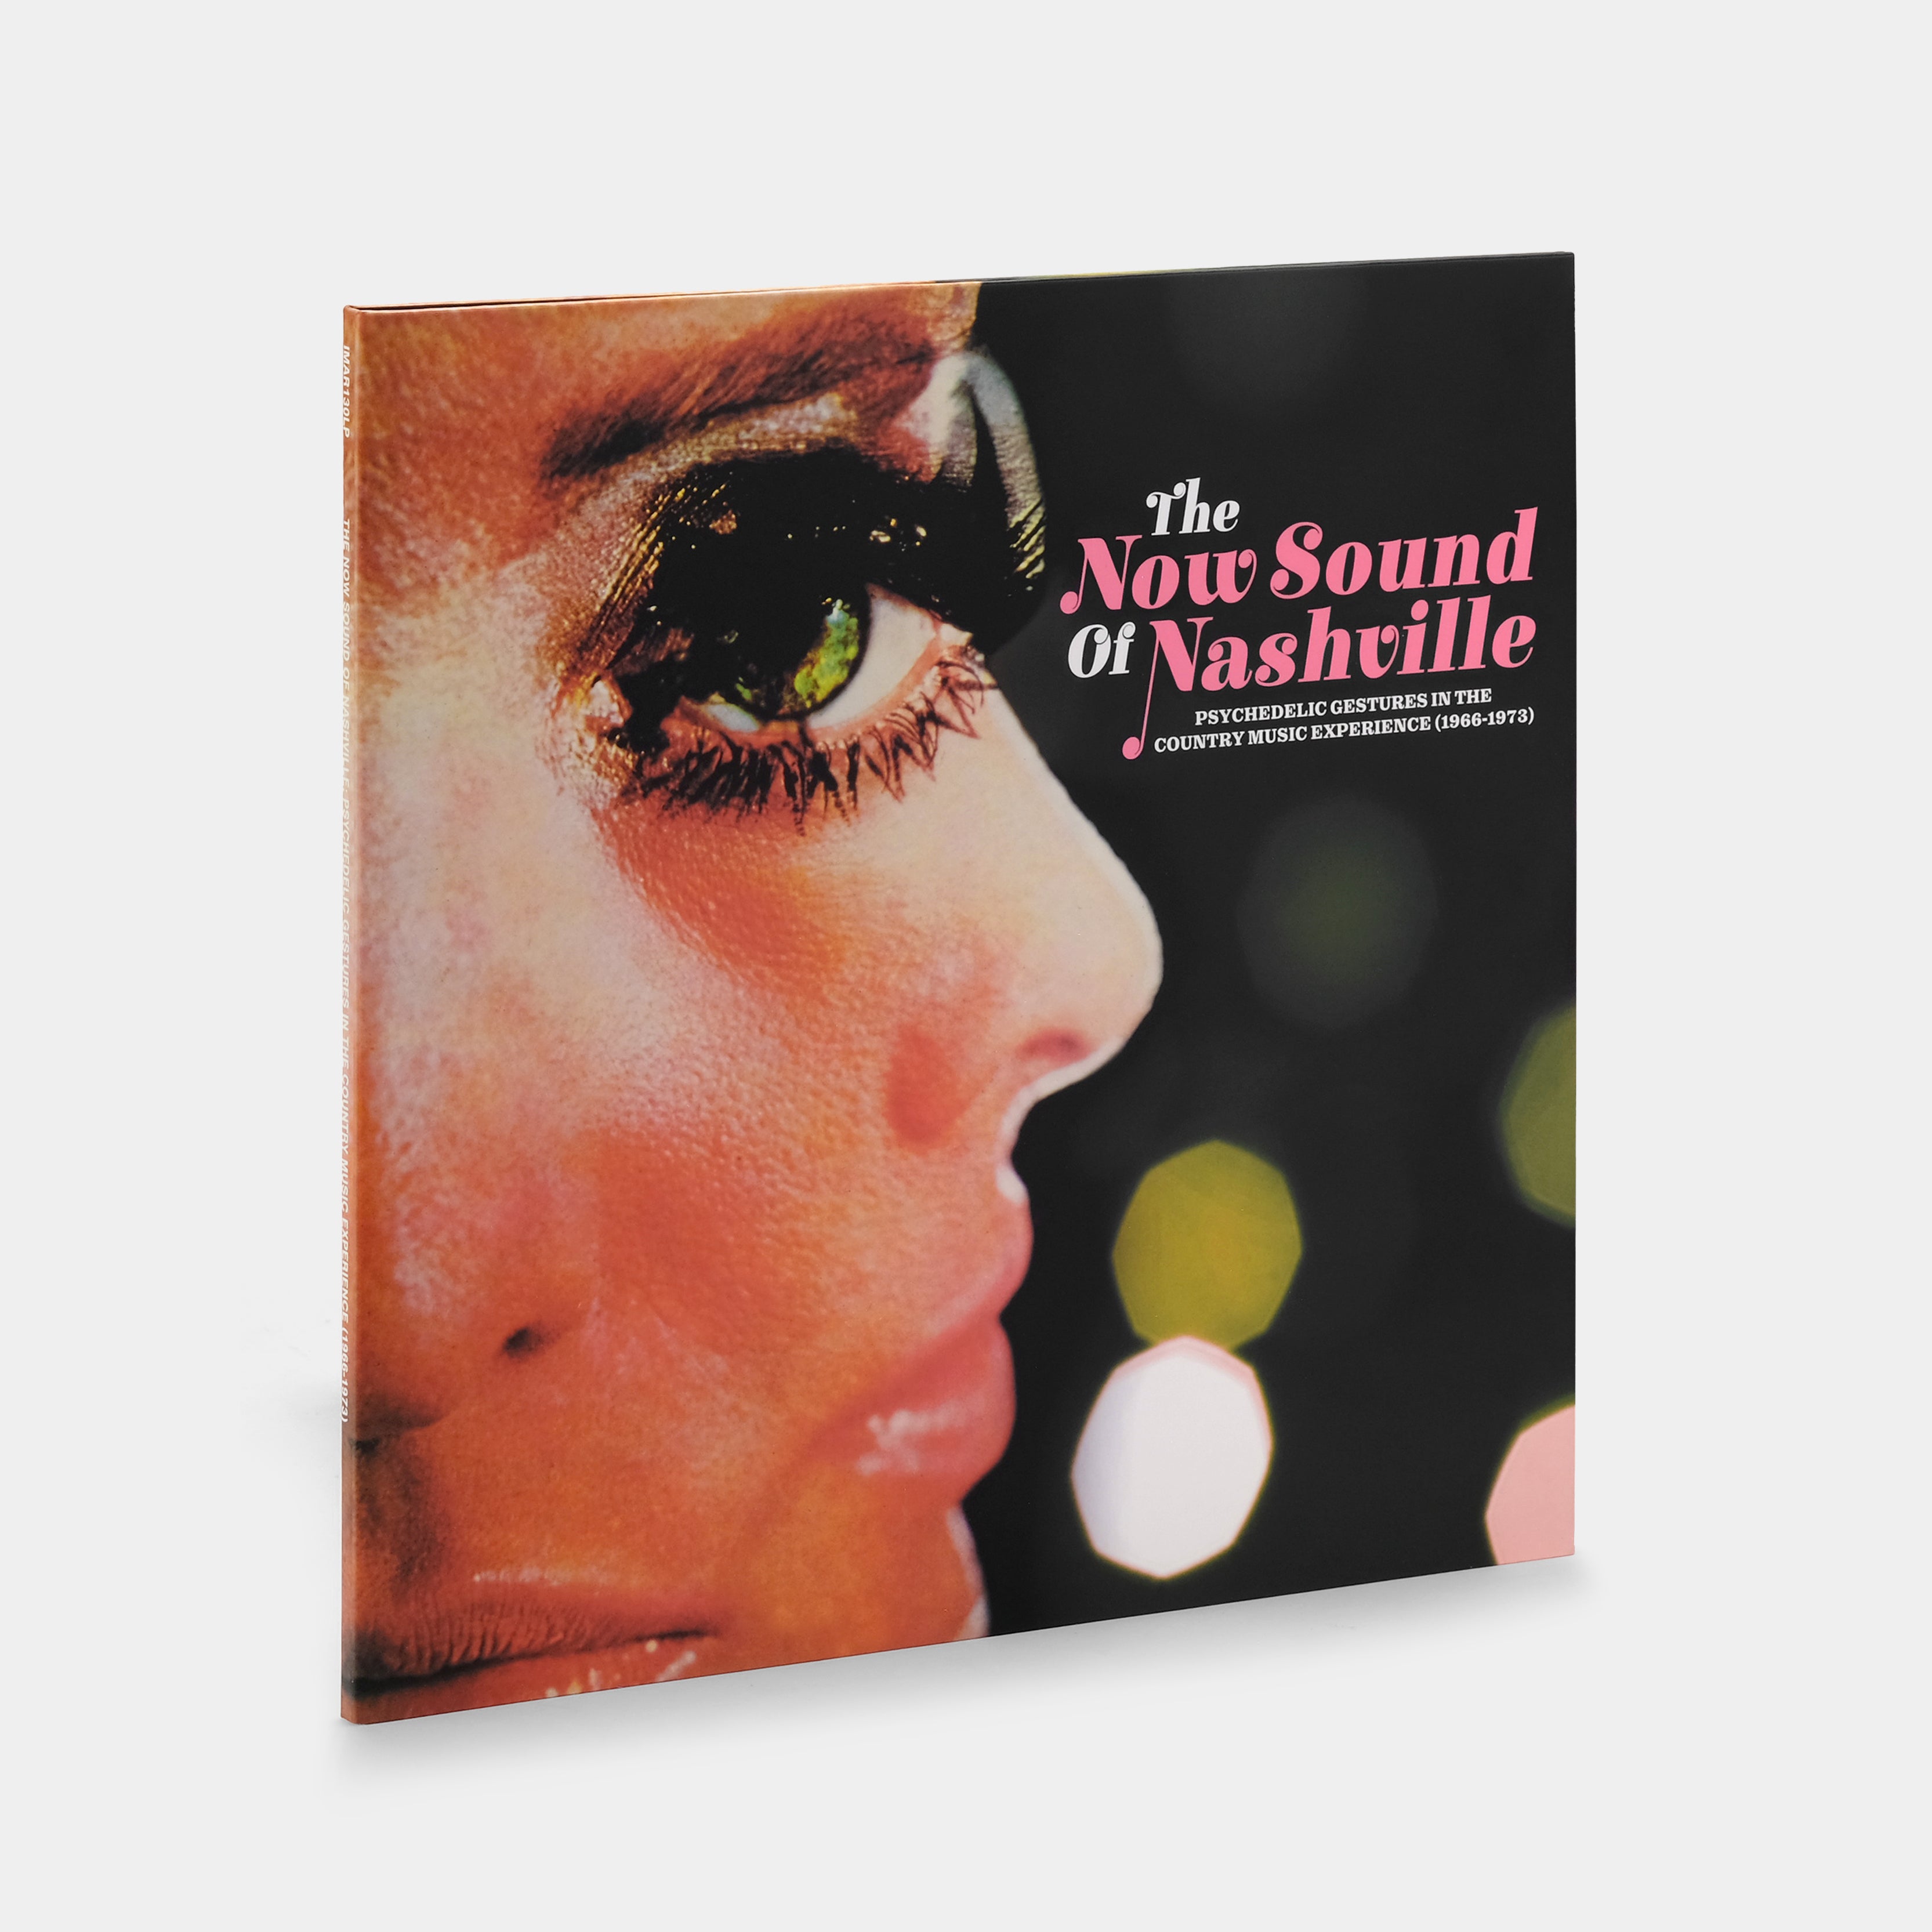 The Now Sound Of Nashville: Psychedelic Gestures In The Country Music Experience (1966-1973) LP Vinyl Record